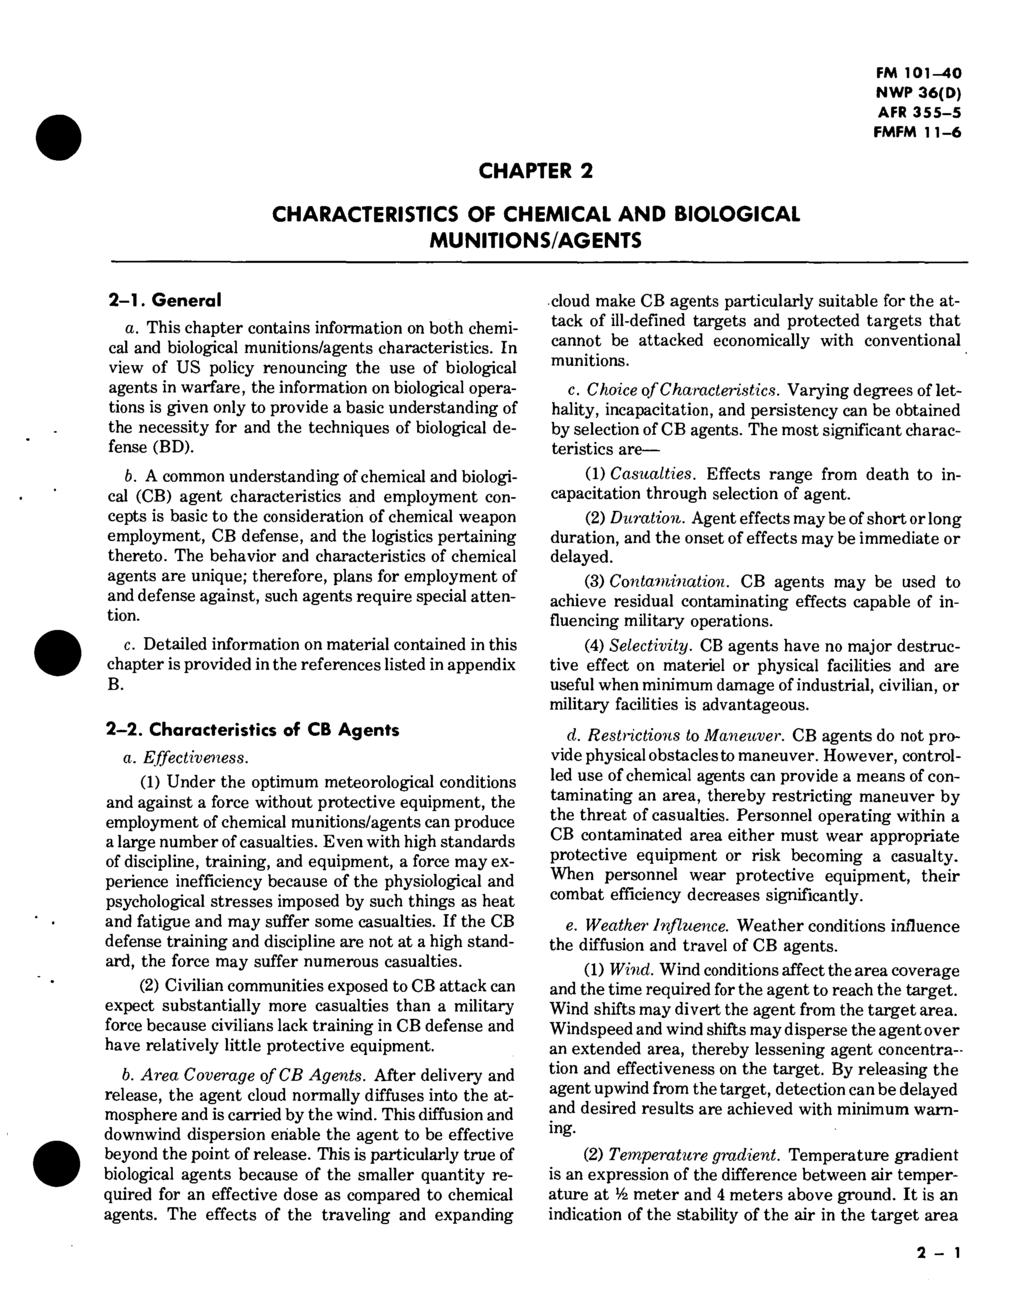 CHAPTER 2 CHARACTERISTICS OF CHEMICAL AND BIOLOGICAL MUNITIONS/AGENTS 2-1. General a. This chapter contains information on both chemical and biological munitions/agents characteristics.